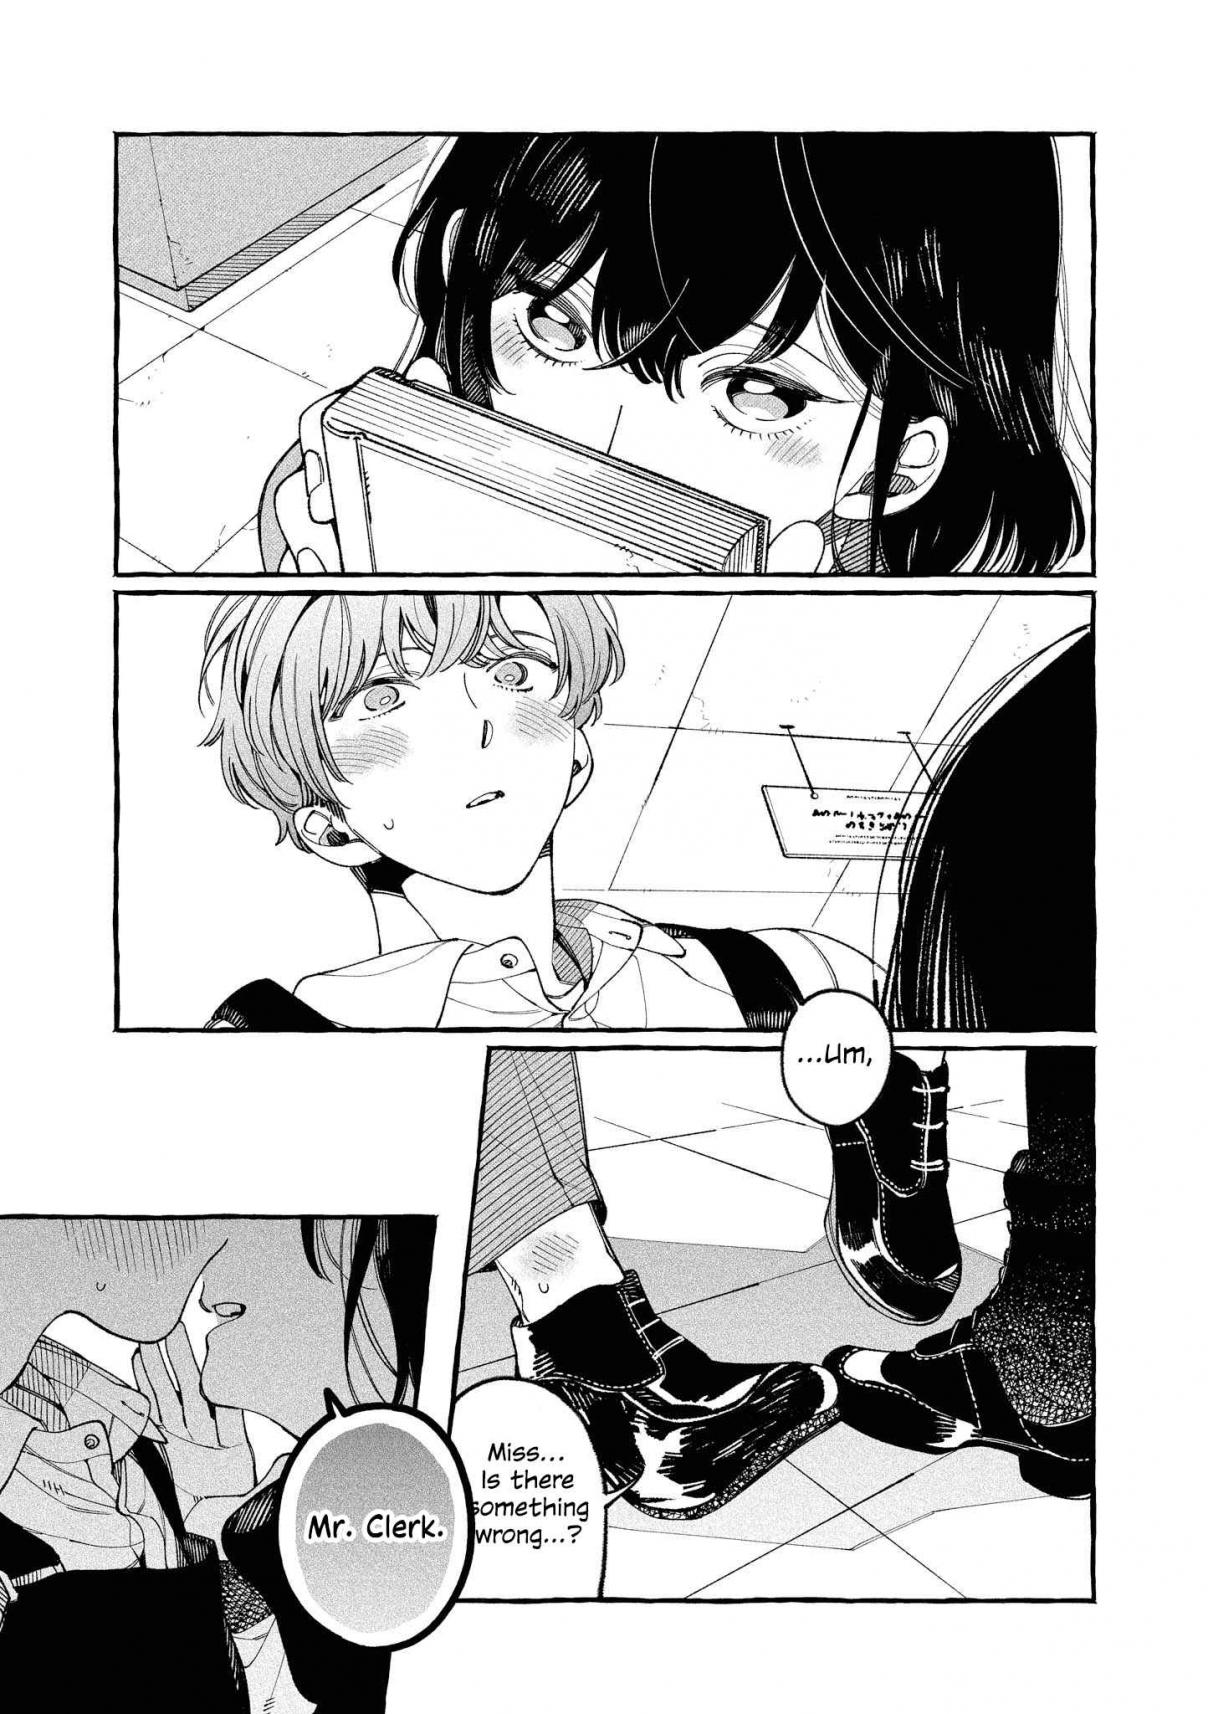 “It’s Too Precious and Hard to Read!!” 4P Short Stories Vol. 2 Ch. 44 Looking Forward to the End of Work [by Medamayaki]